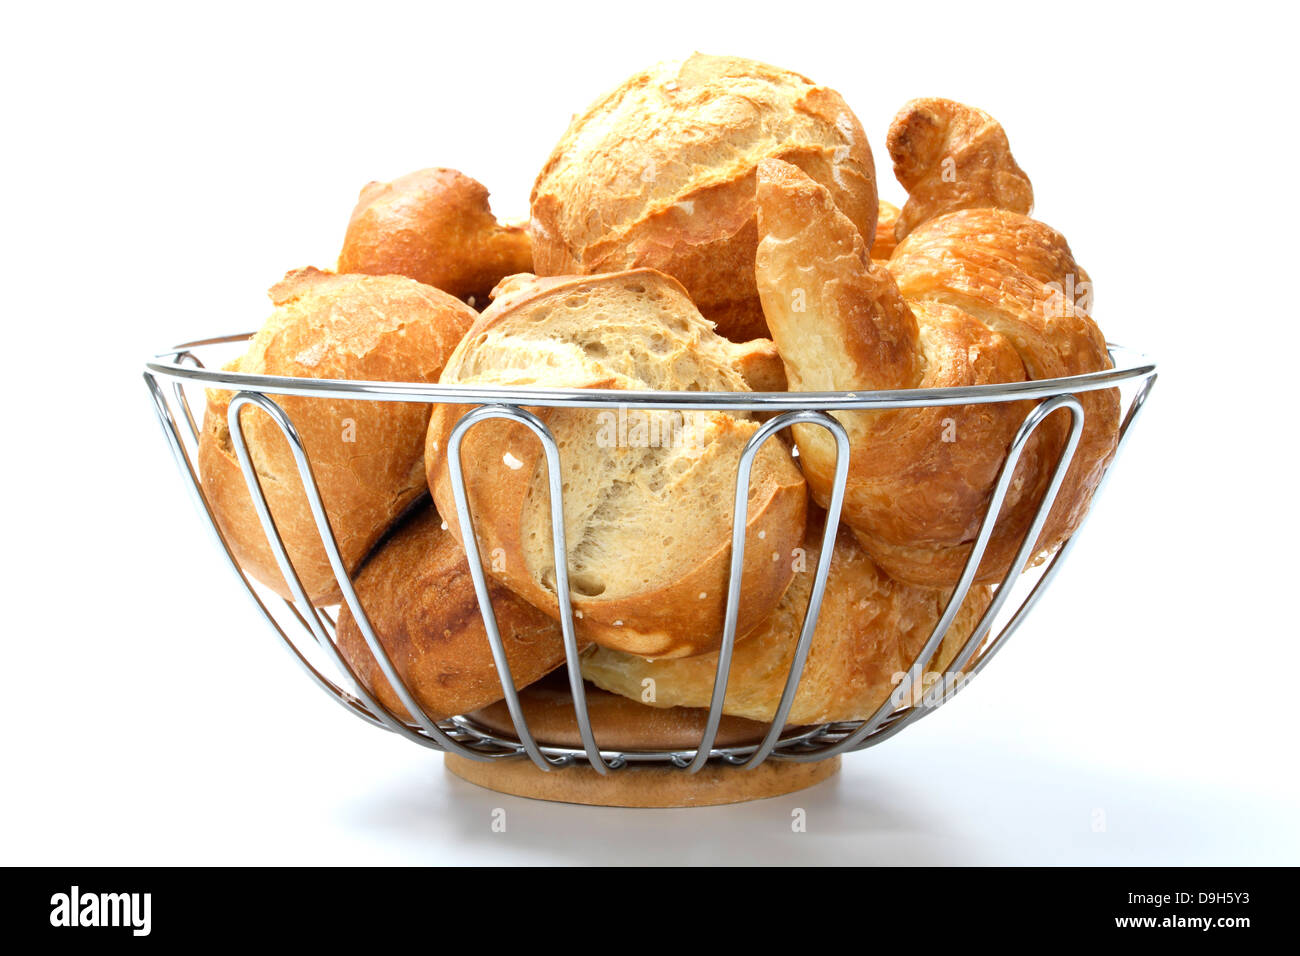 Bread rolls and croissants in the basket Stock Photo